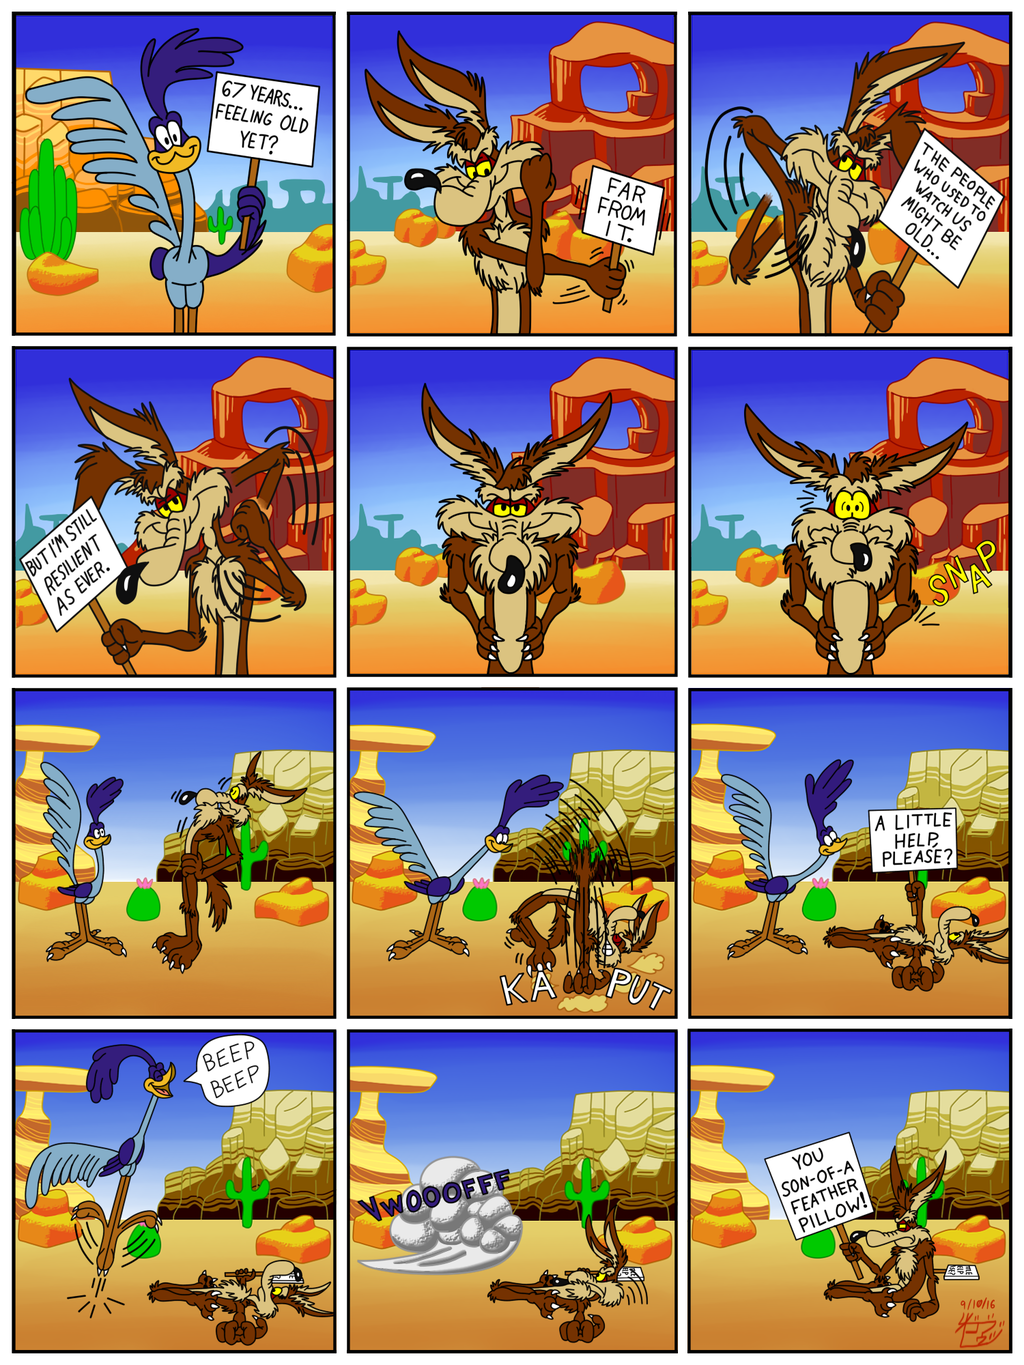 Wile E and Roadrunner's 67th Anniversary Comic